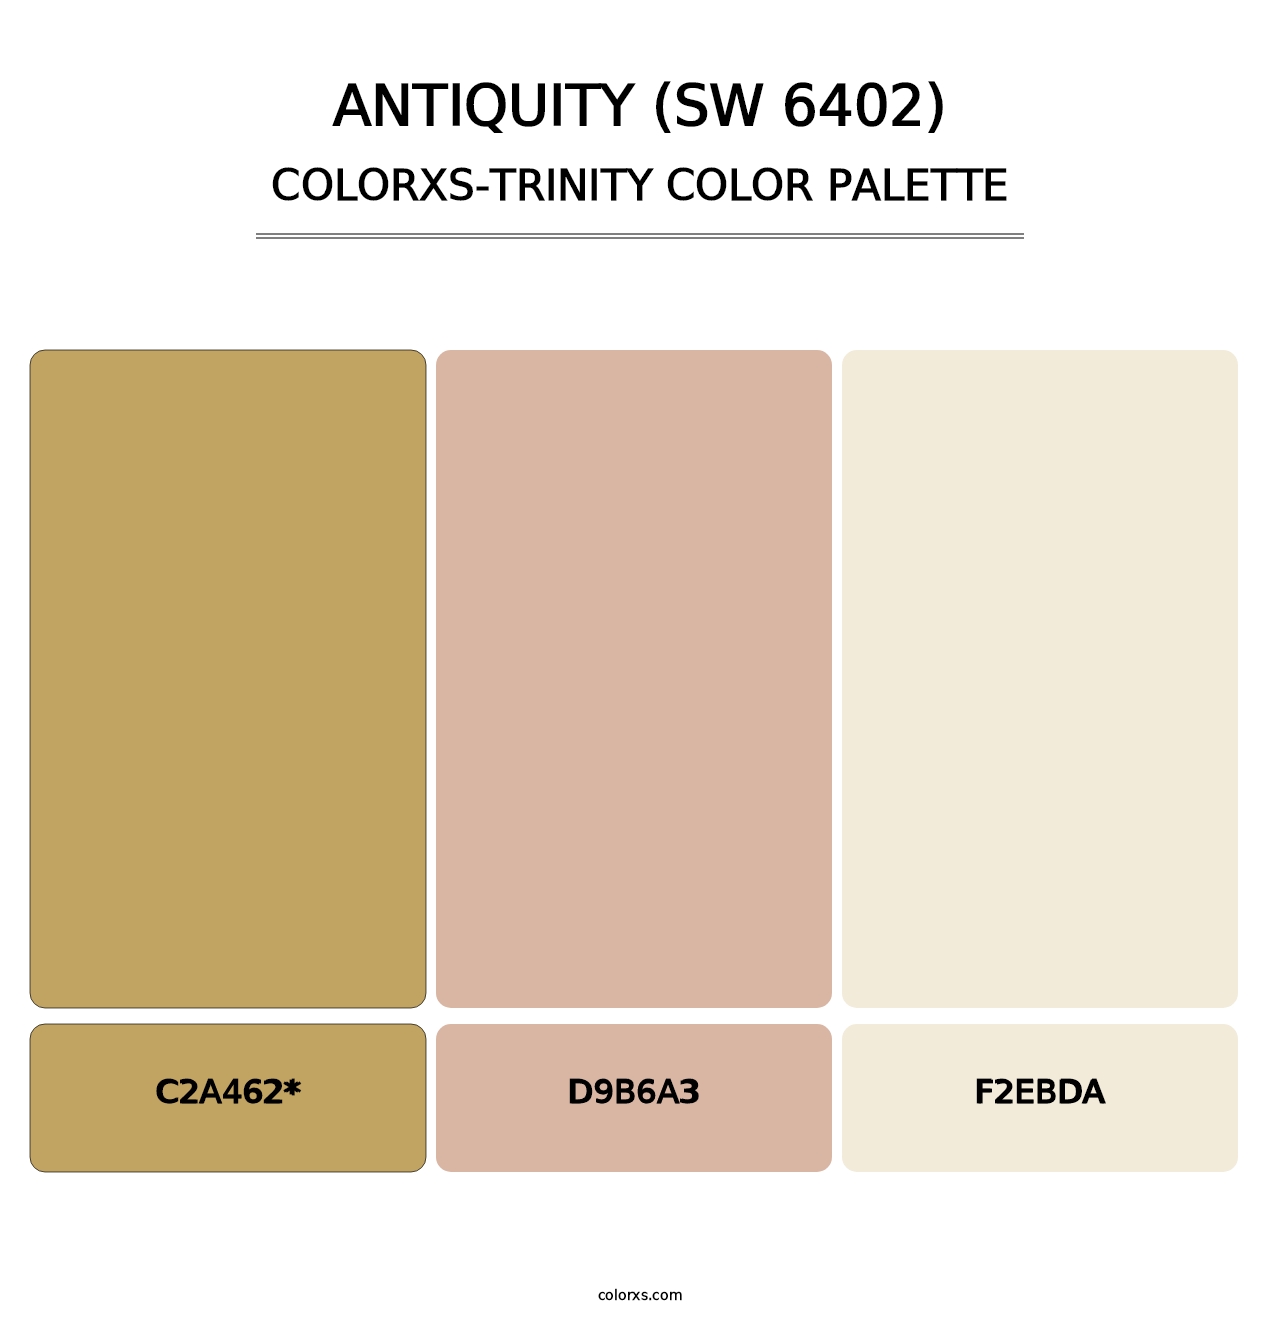 Antiquity (SW 6402) - Colorxs Trinity Palette